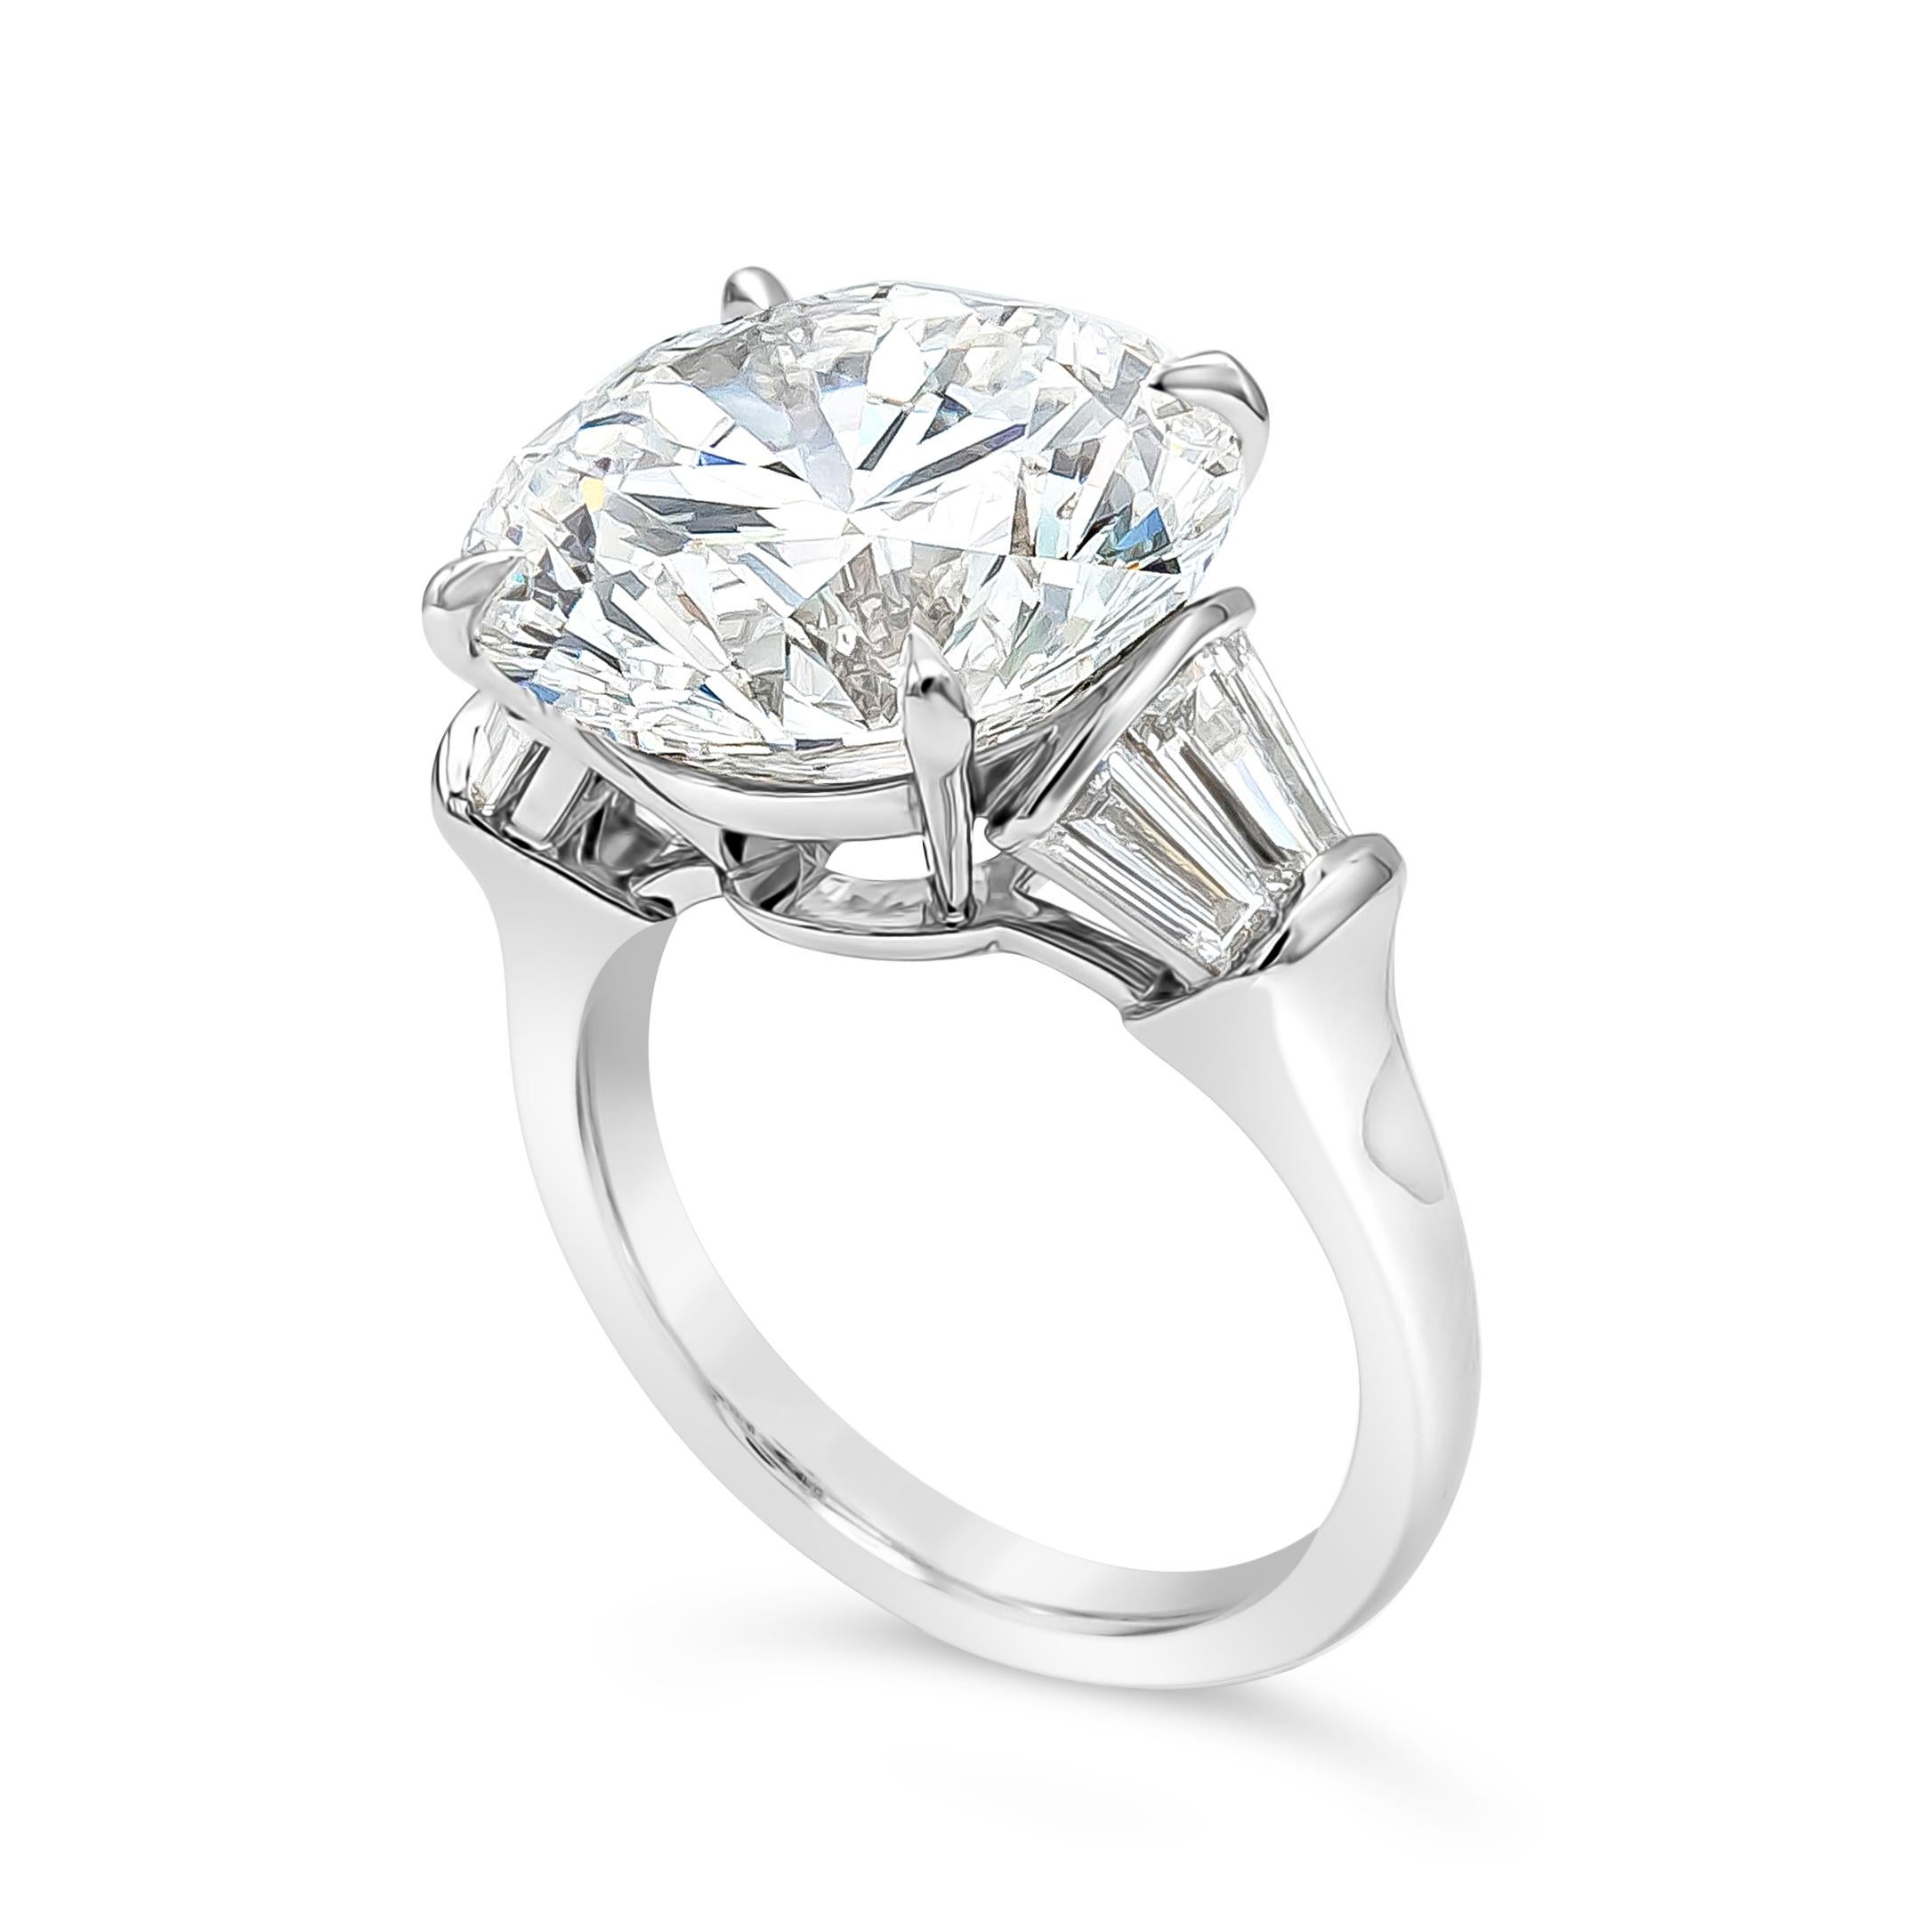 Round Cut GIA Certified 12.03 Carat Brilliant Round Diamond Engagement Ring For Sale